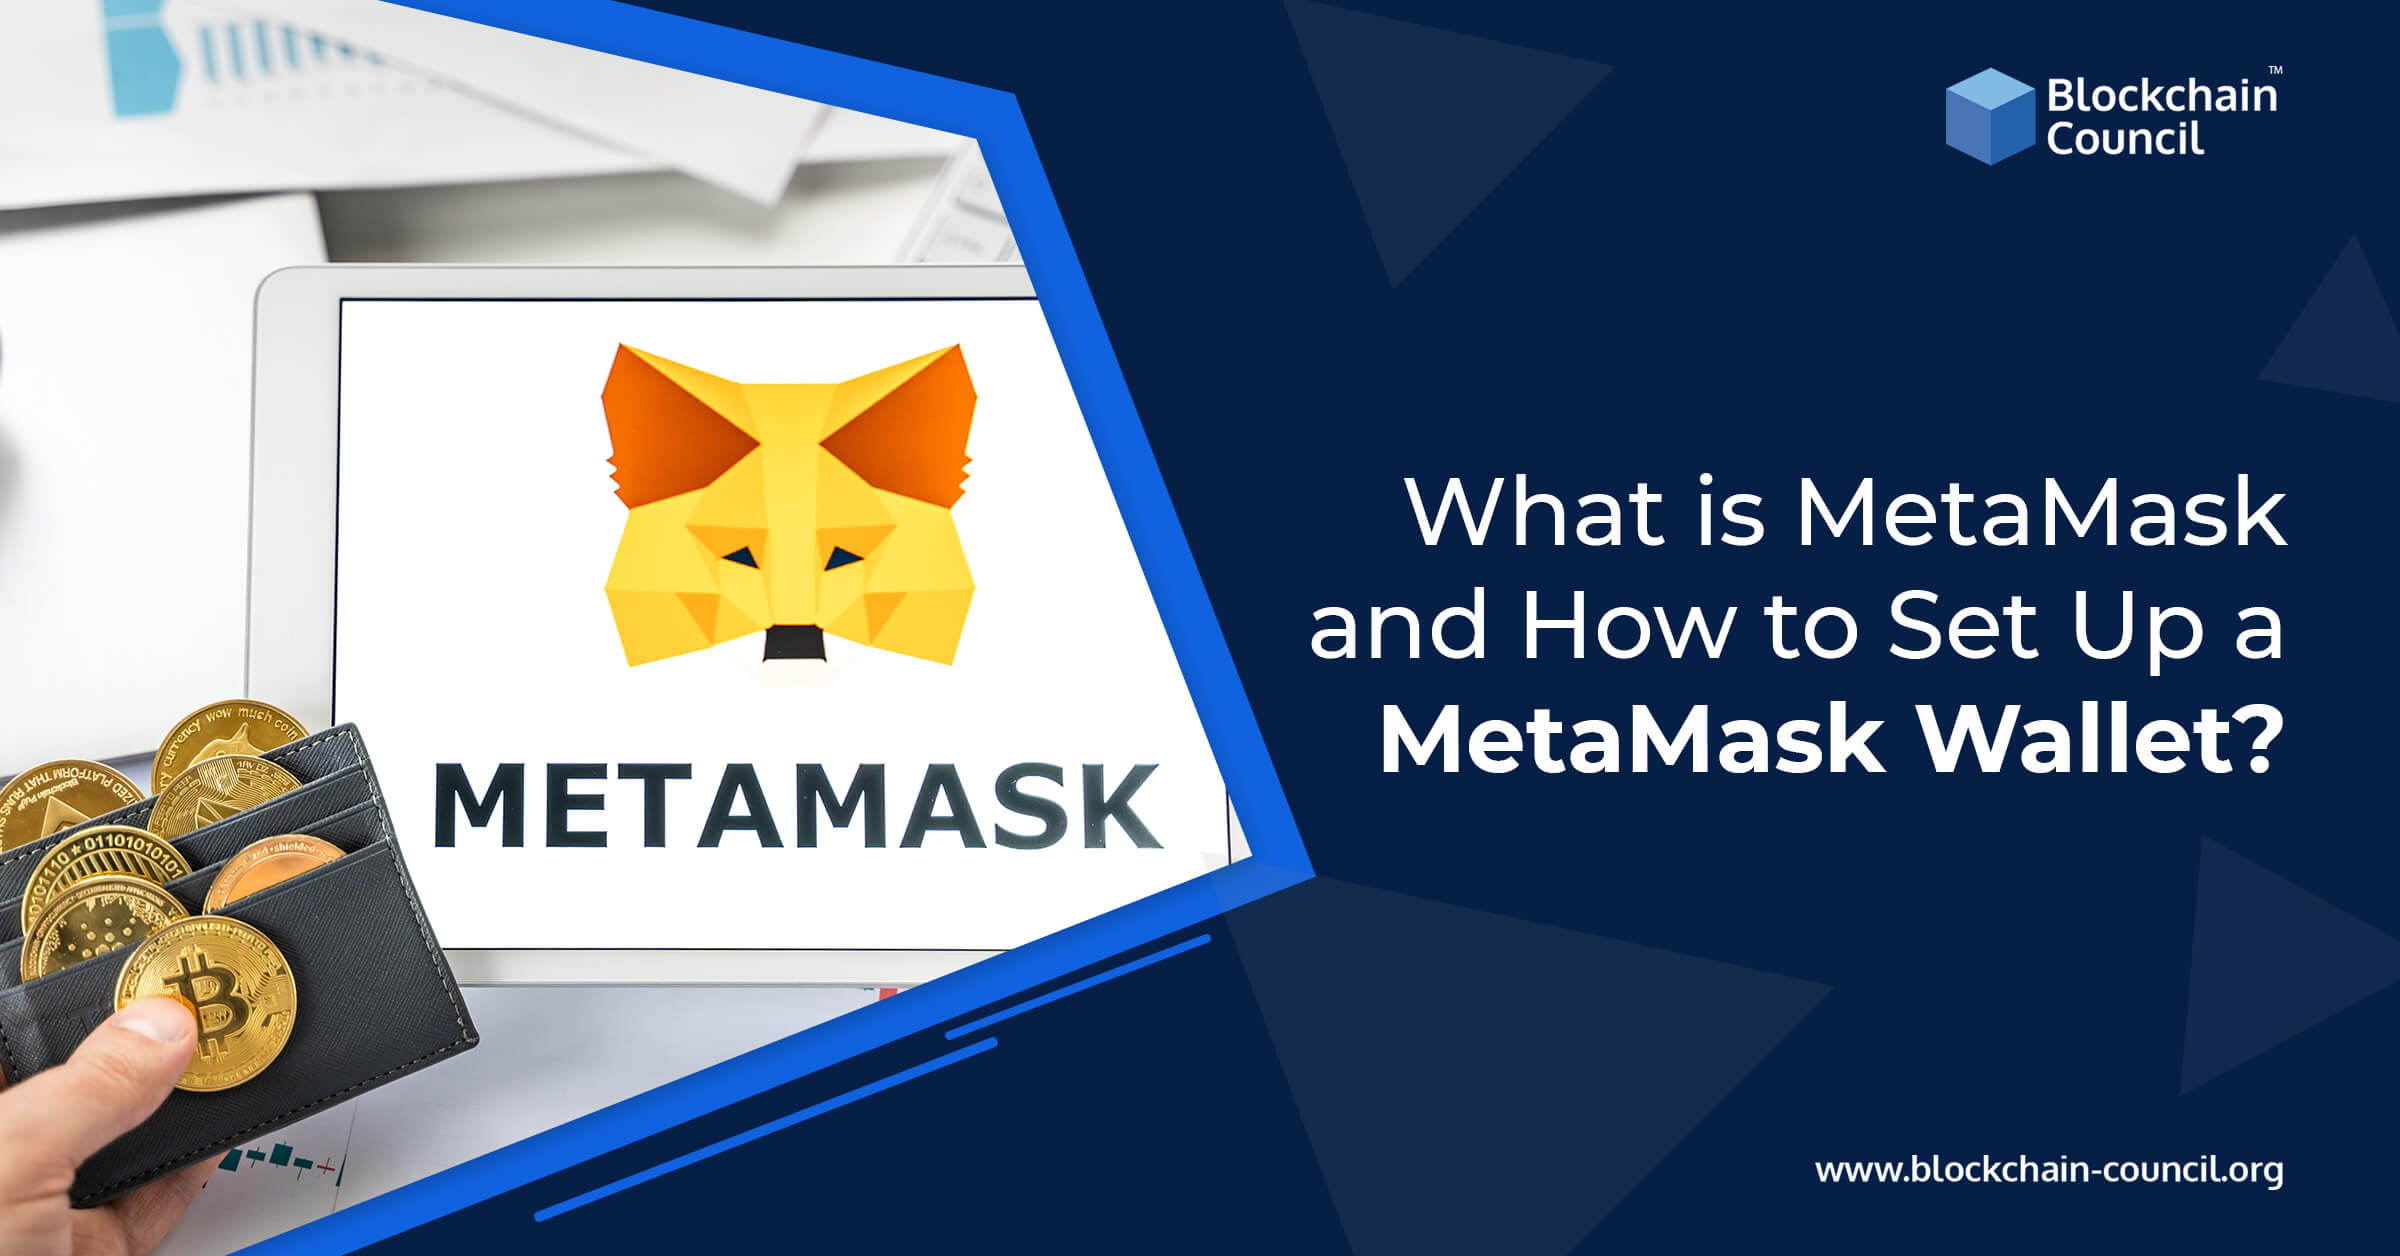 What is MetaMask and How to Set Up a MetaMask Wallet?